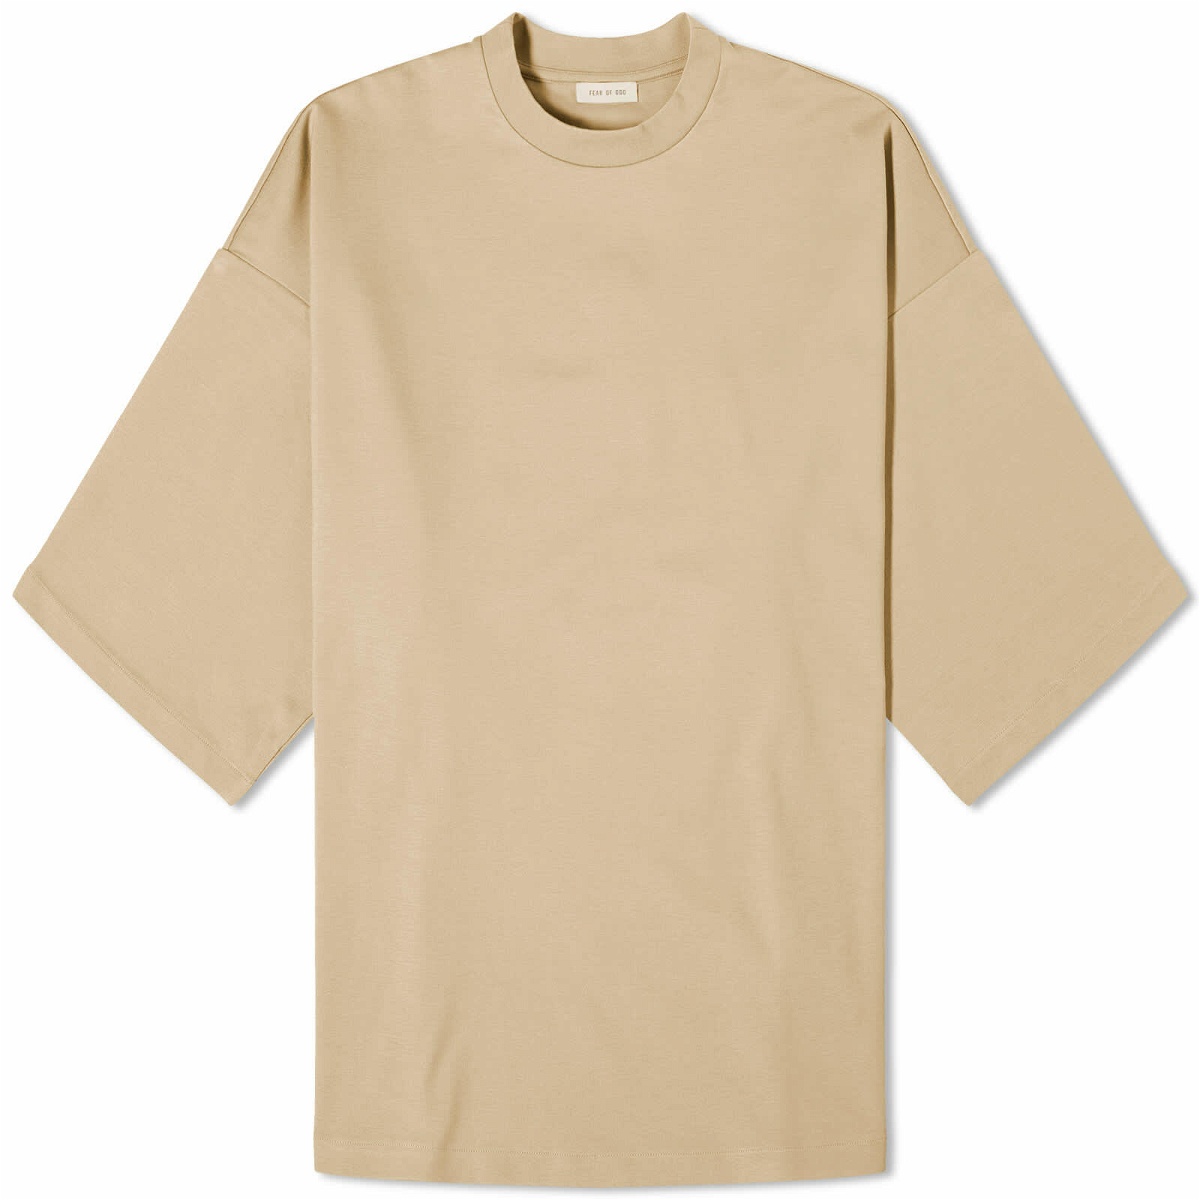 SSENSE Exclusive Beige T-Shirt by Fear of God ESSENTIALS on Sale